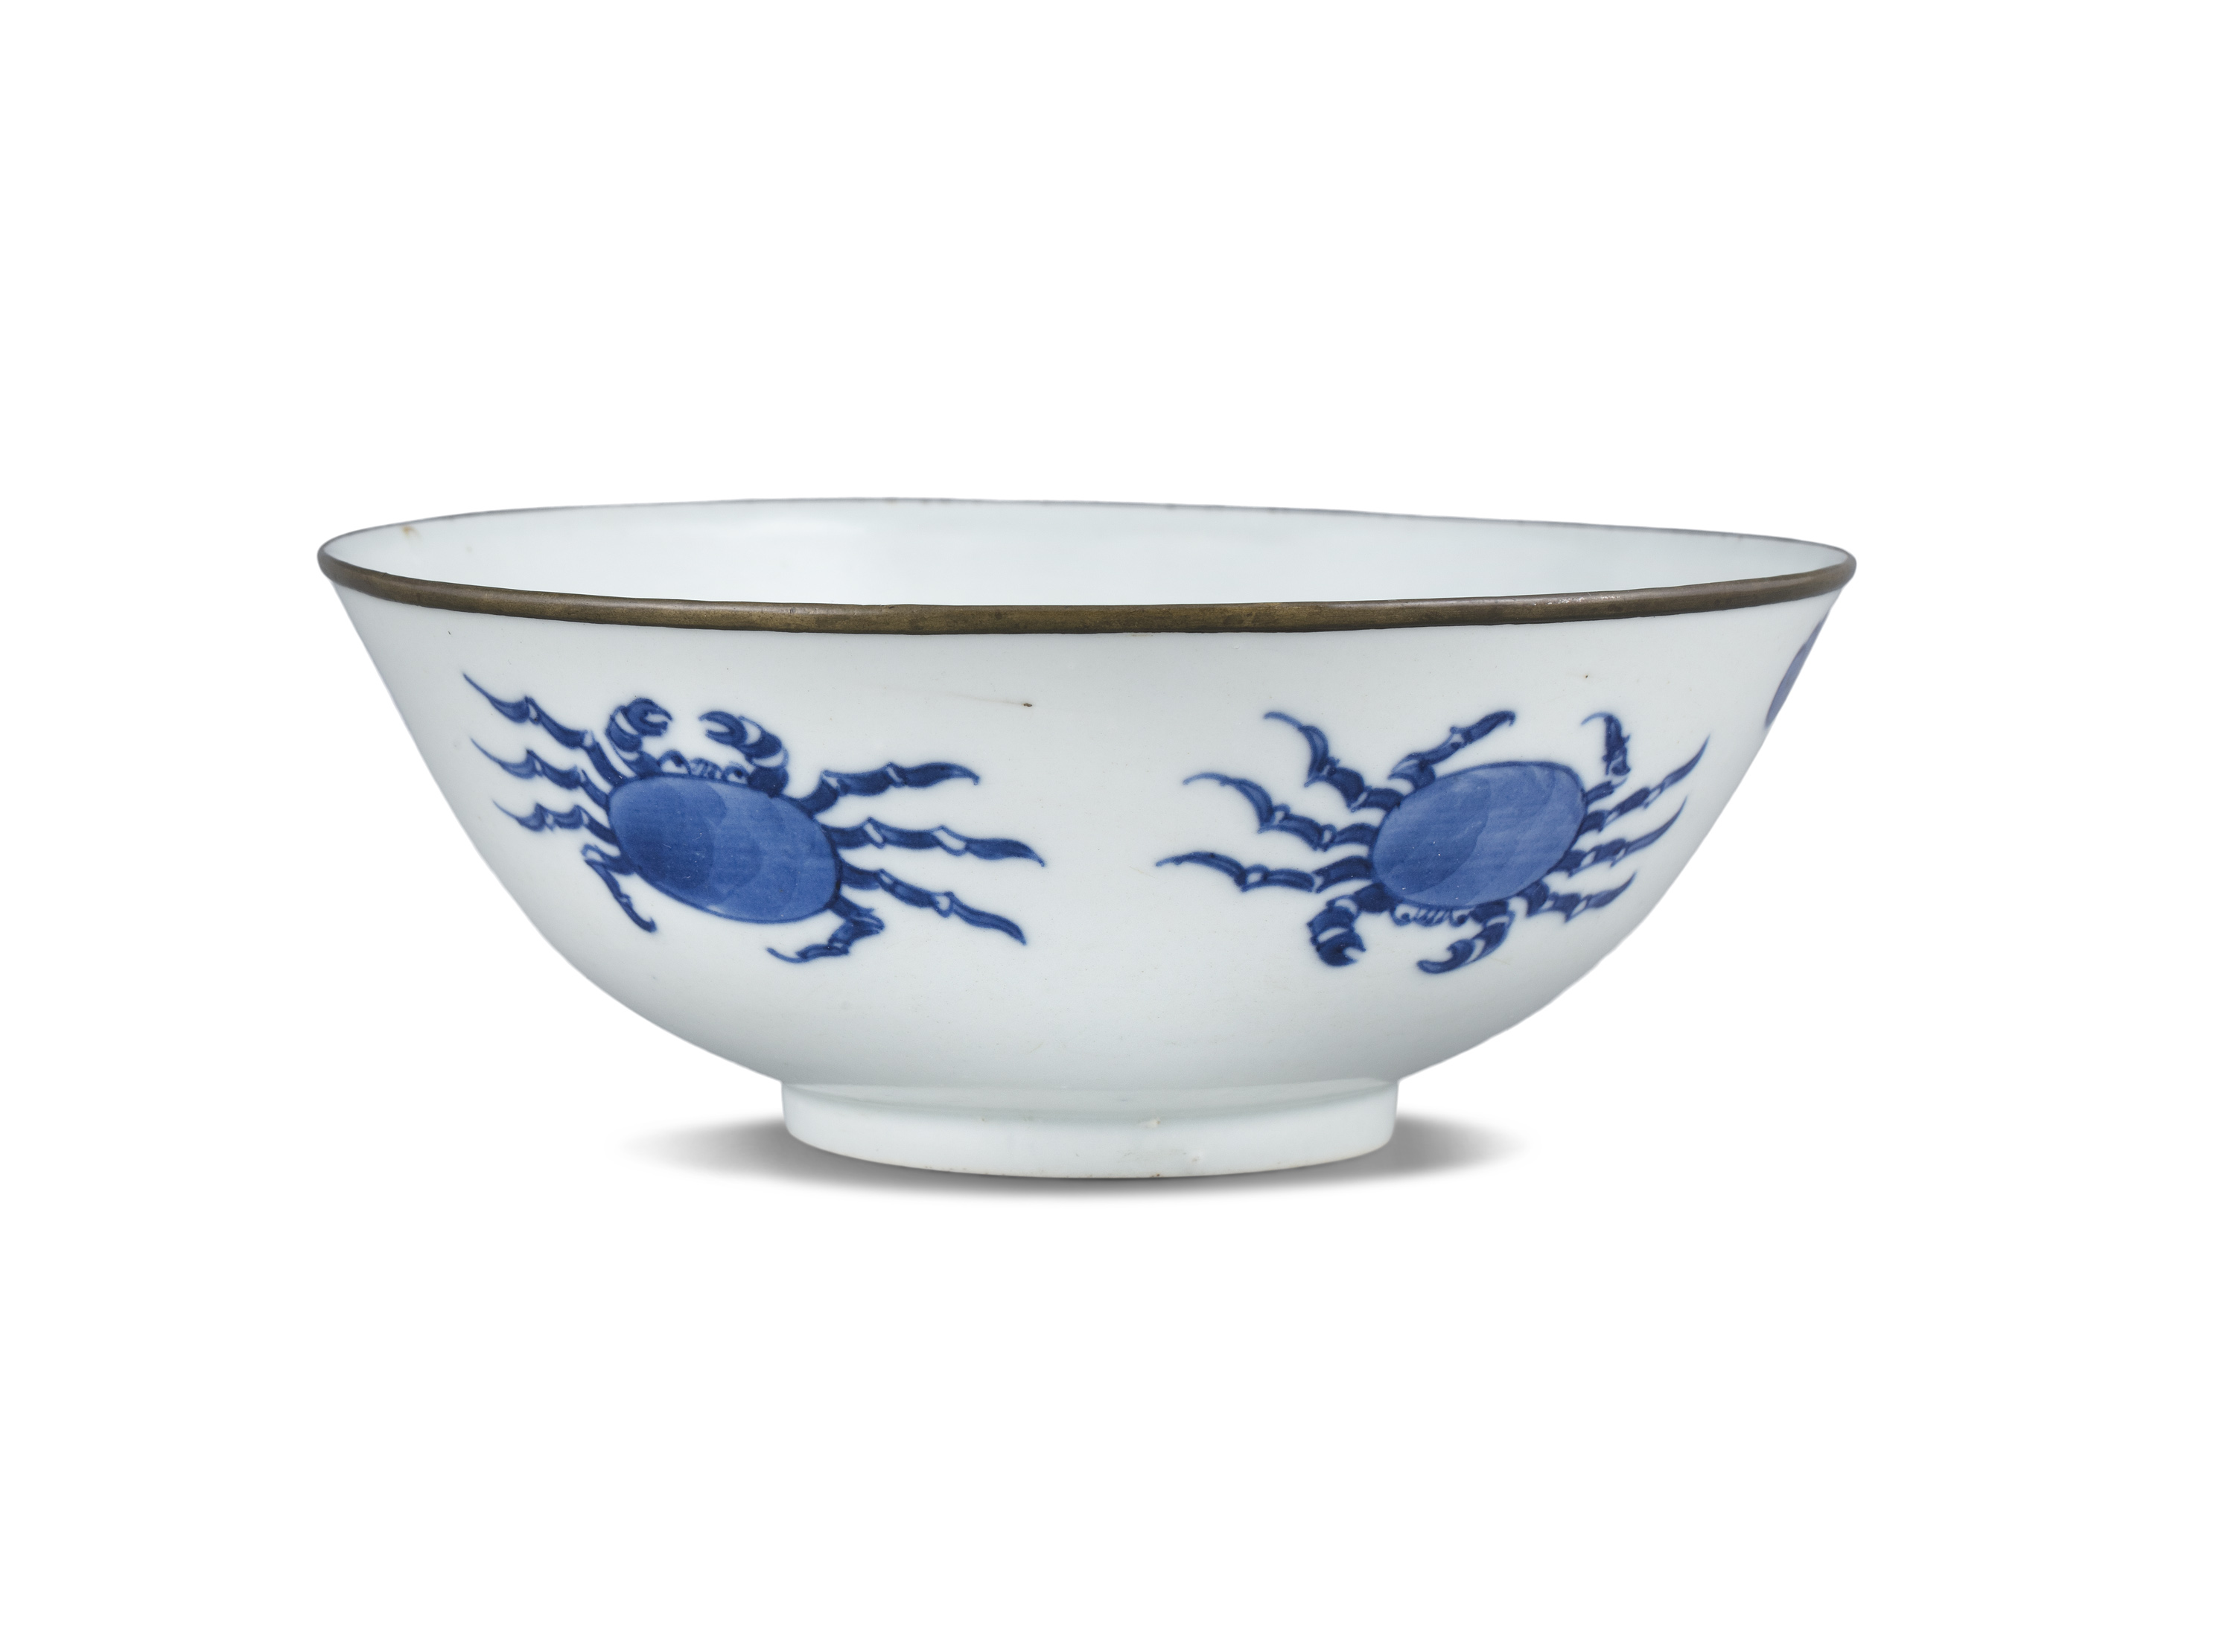 A BLEU DE HUE PORCELAIN BOWL ‘CRAB AND LOTUS POND’ BOWL INSCRIBED WITH THE MARK NGOẠN NGỌC 玩玉 - Image 2 of 18